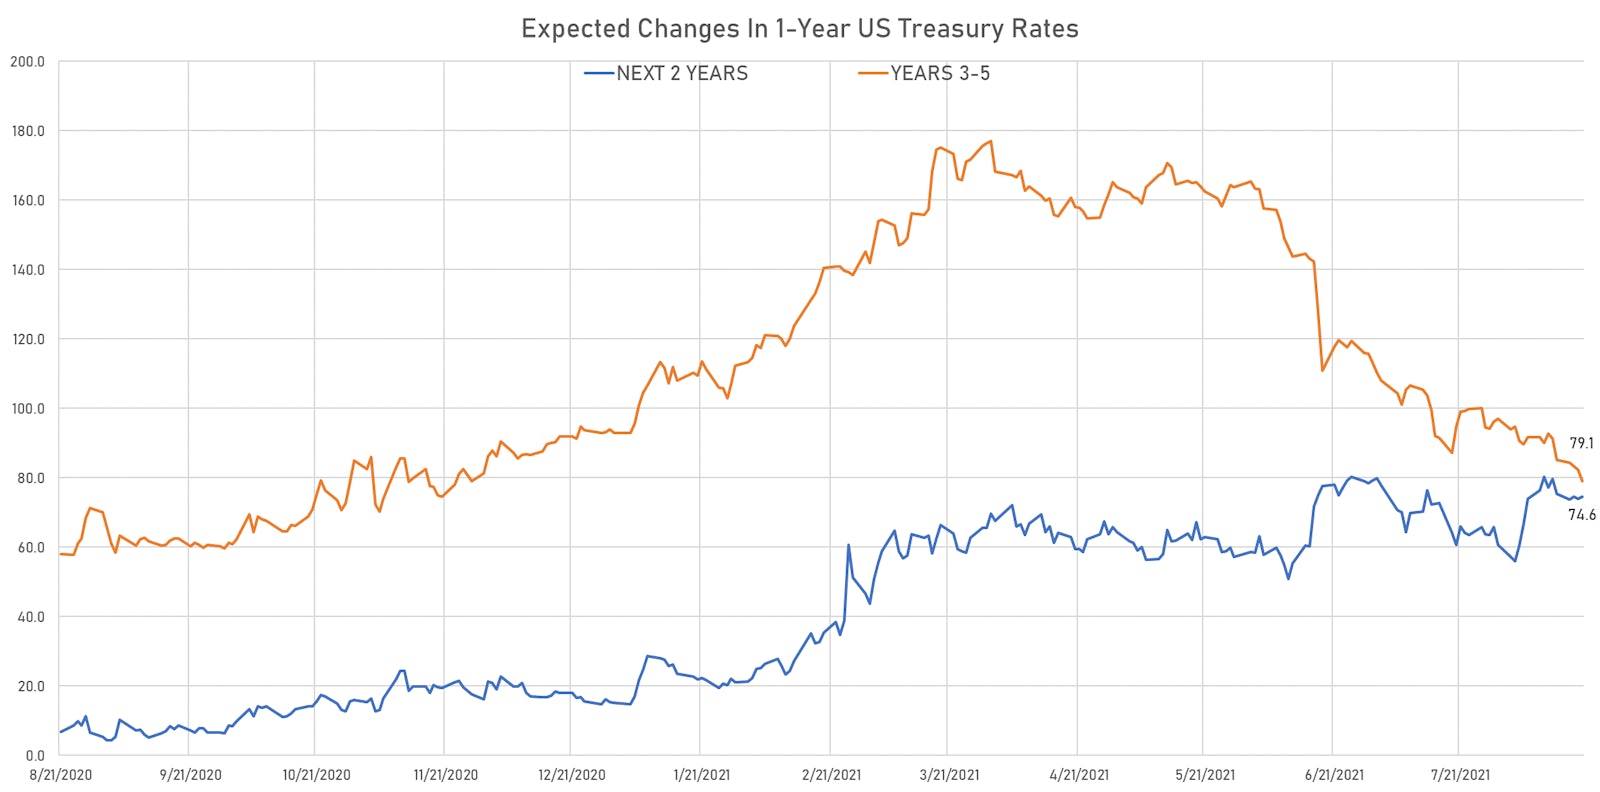 Implied Fed Hikes Derived From 1Y Treasury Forward Rates | Sources: ϕpost, Refinitiv data